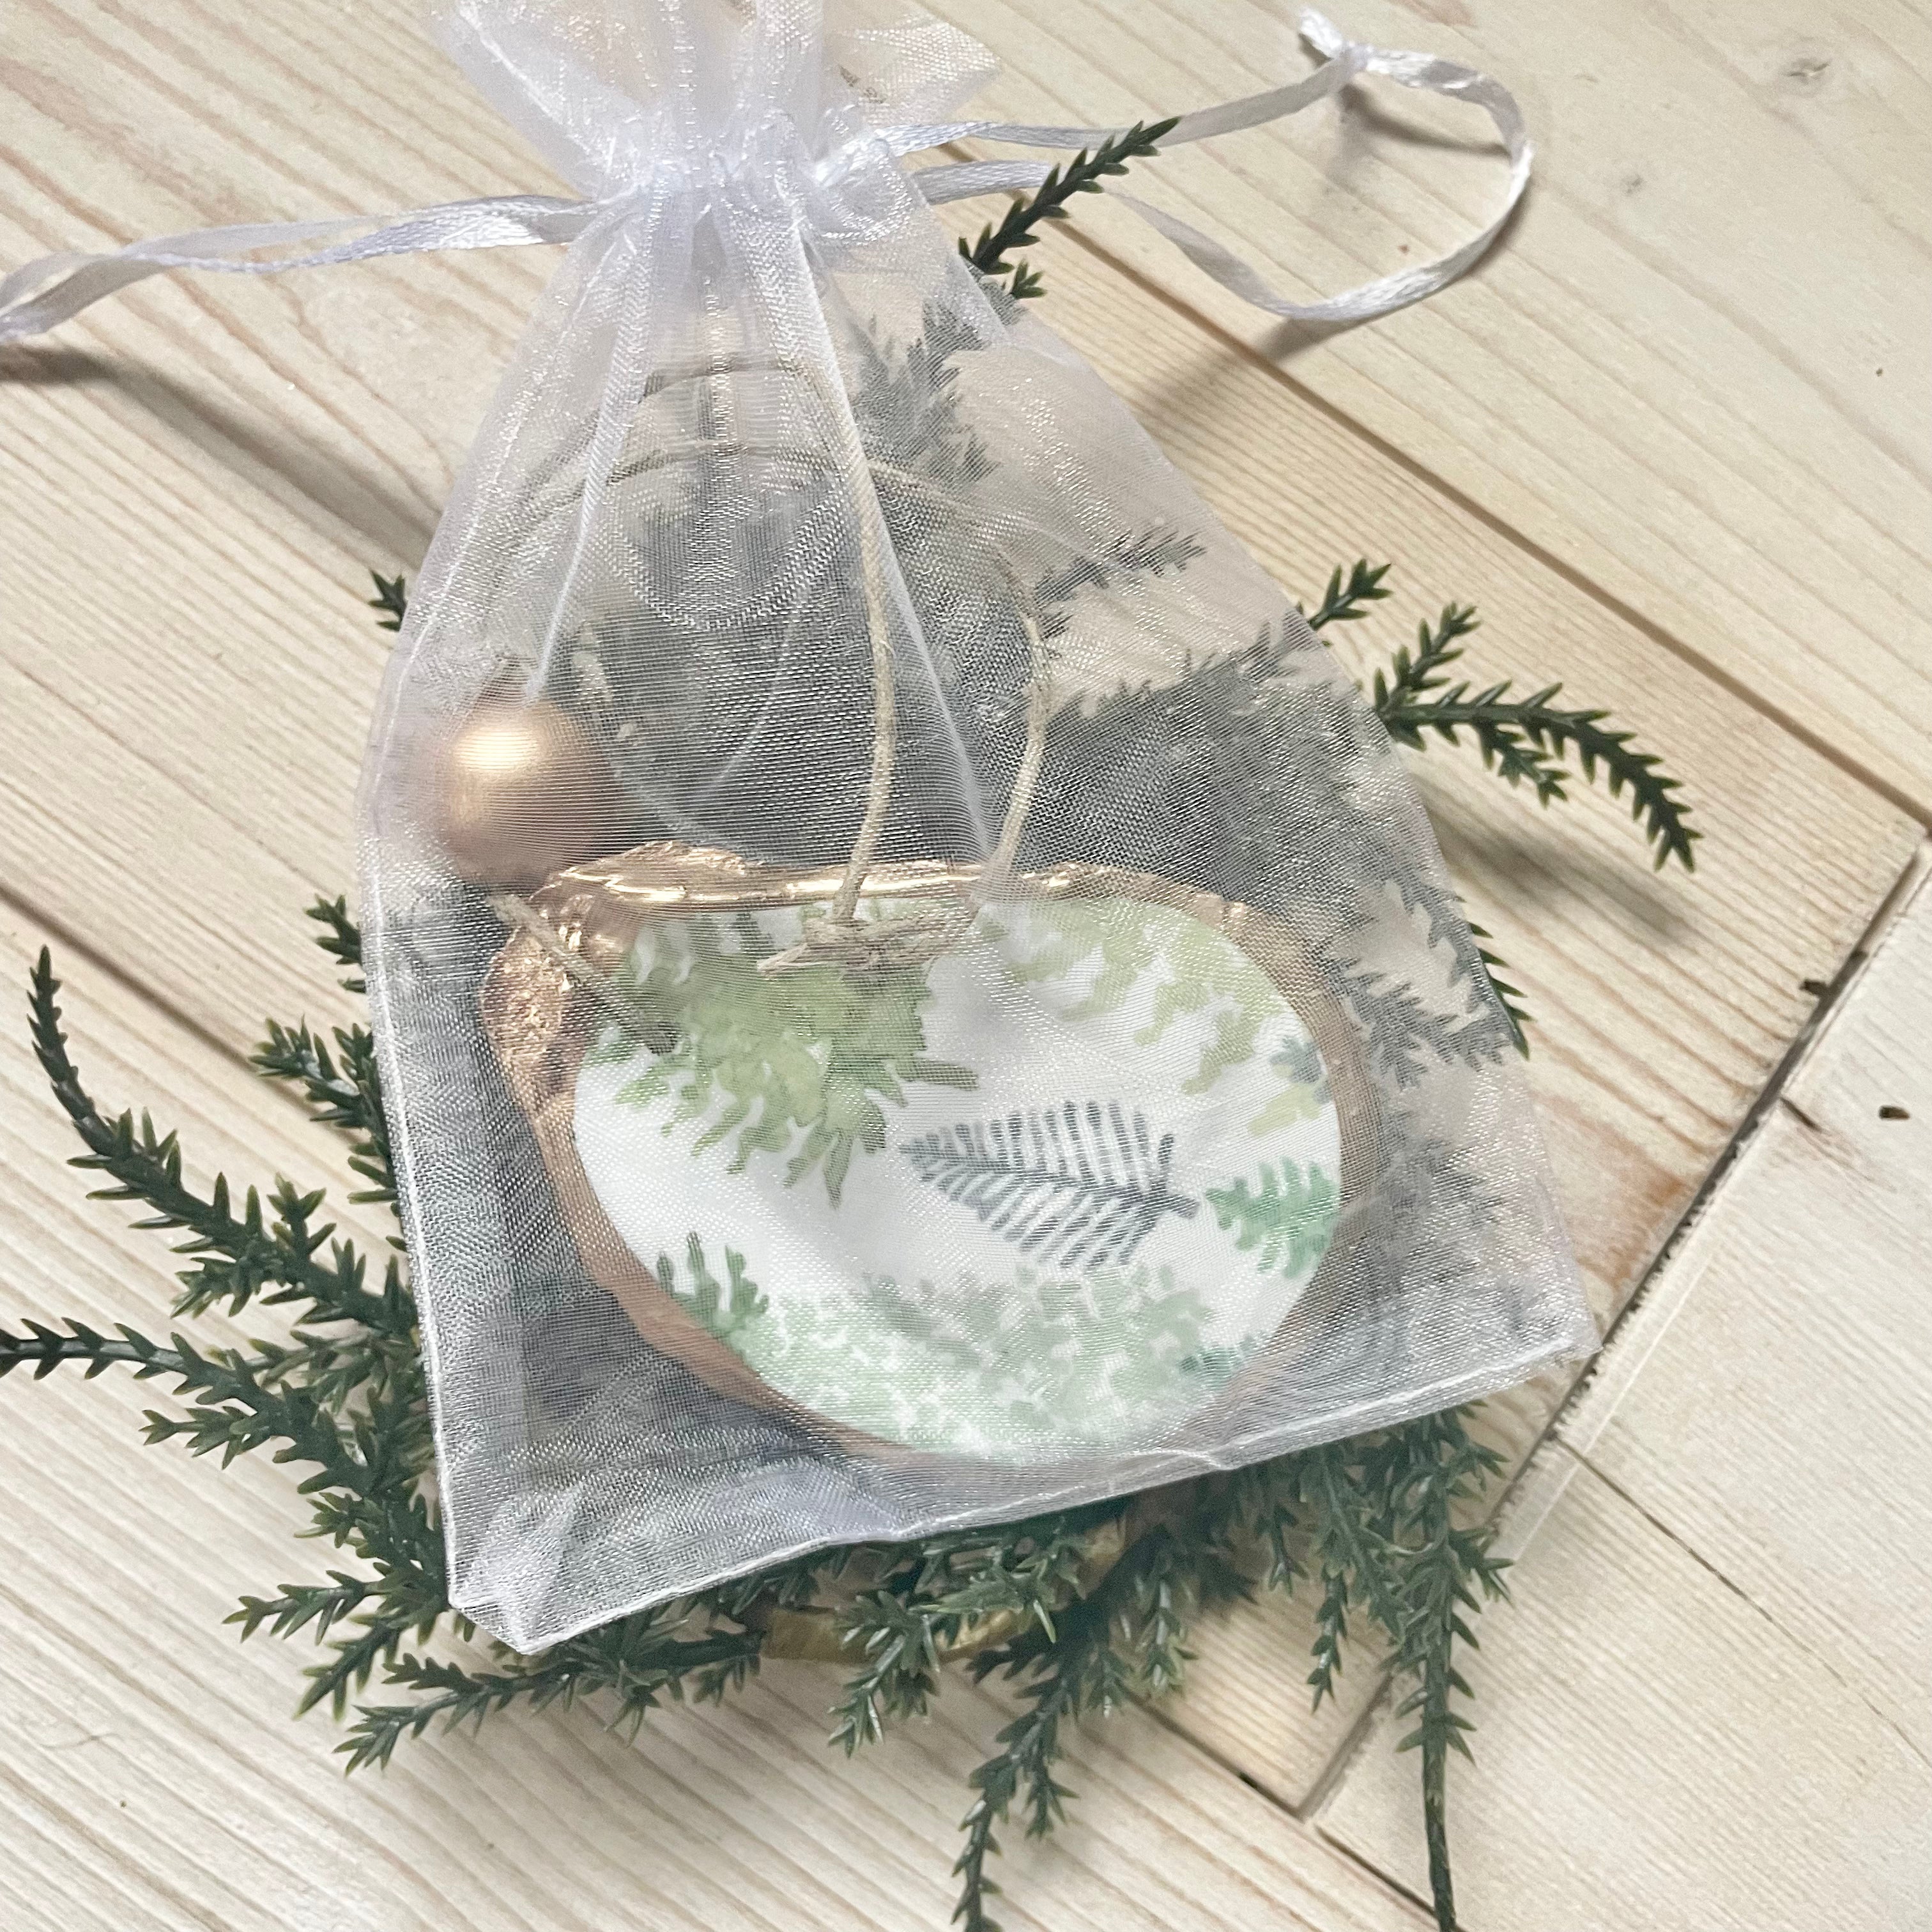 Evergreen Oyster Ornament